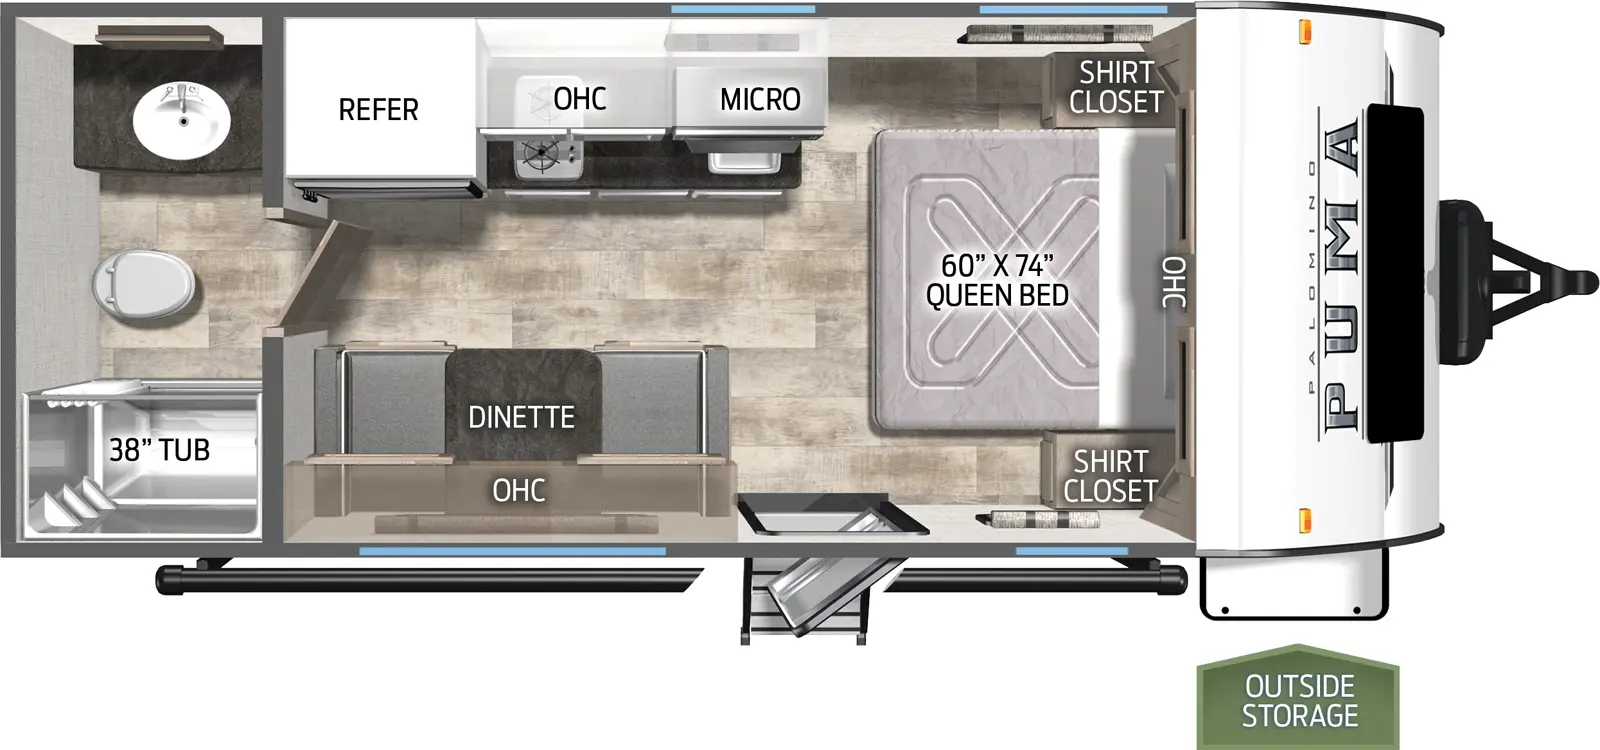 The 16QBX has no slide outs. Exterior features include a 12 foot awning. Interior layout from the front to back: queen bed with two shirt closets; booth dinette; kitchen with cooktop and refrigerator; full bathroom.
